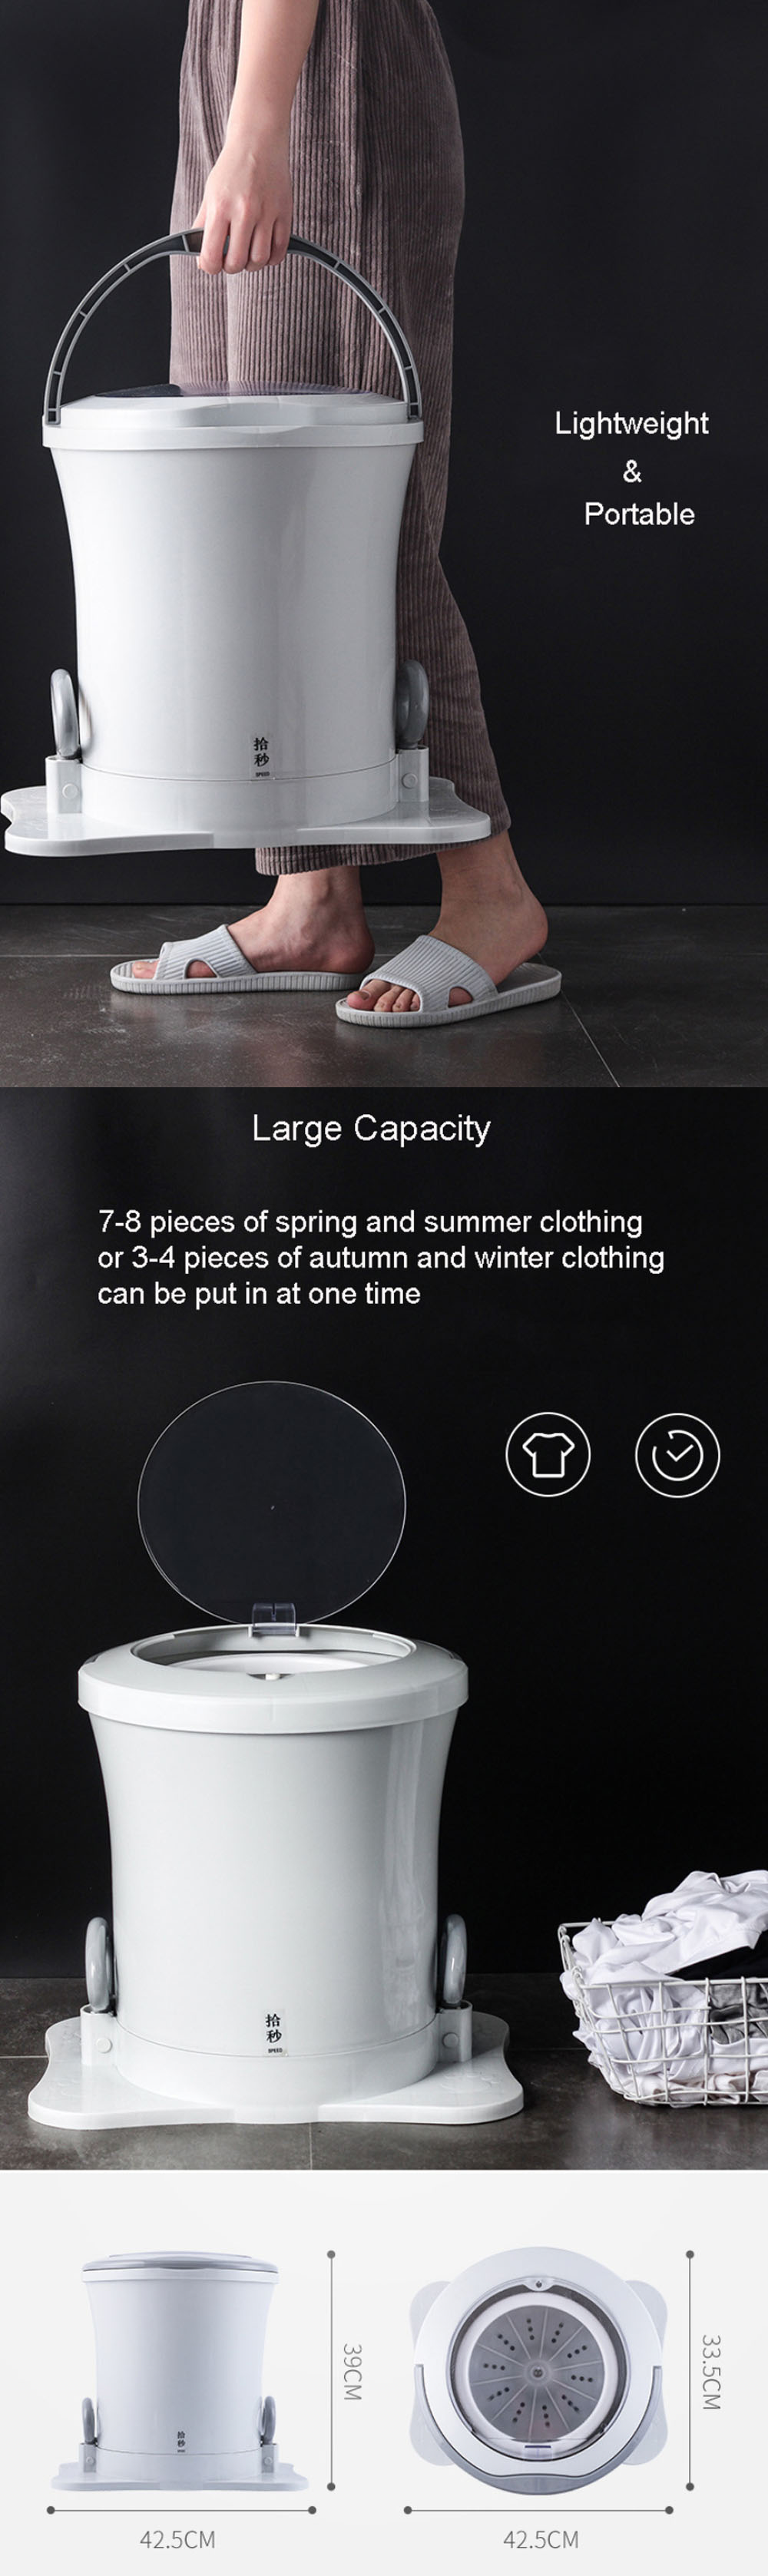 Manual-Clothes-Dehydrator-Mini-Portable-Clothes-Dryer-Sport-Fieness-Exercise-Tools-Outdoor-Camping-T-1776139-2